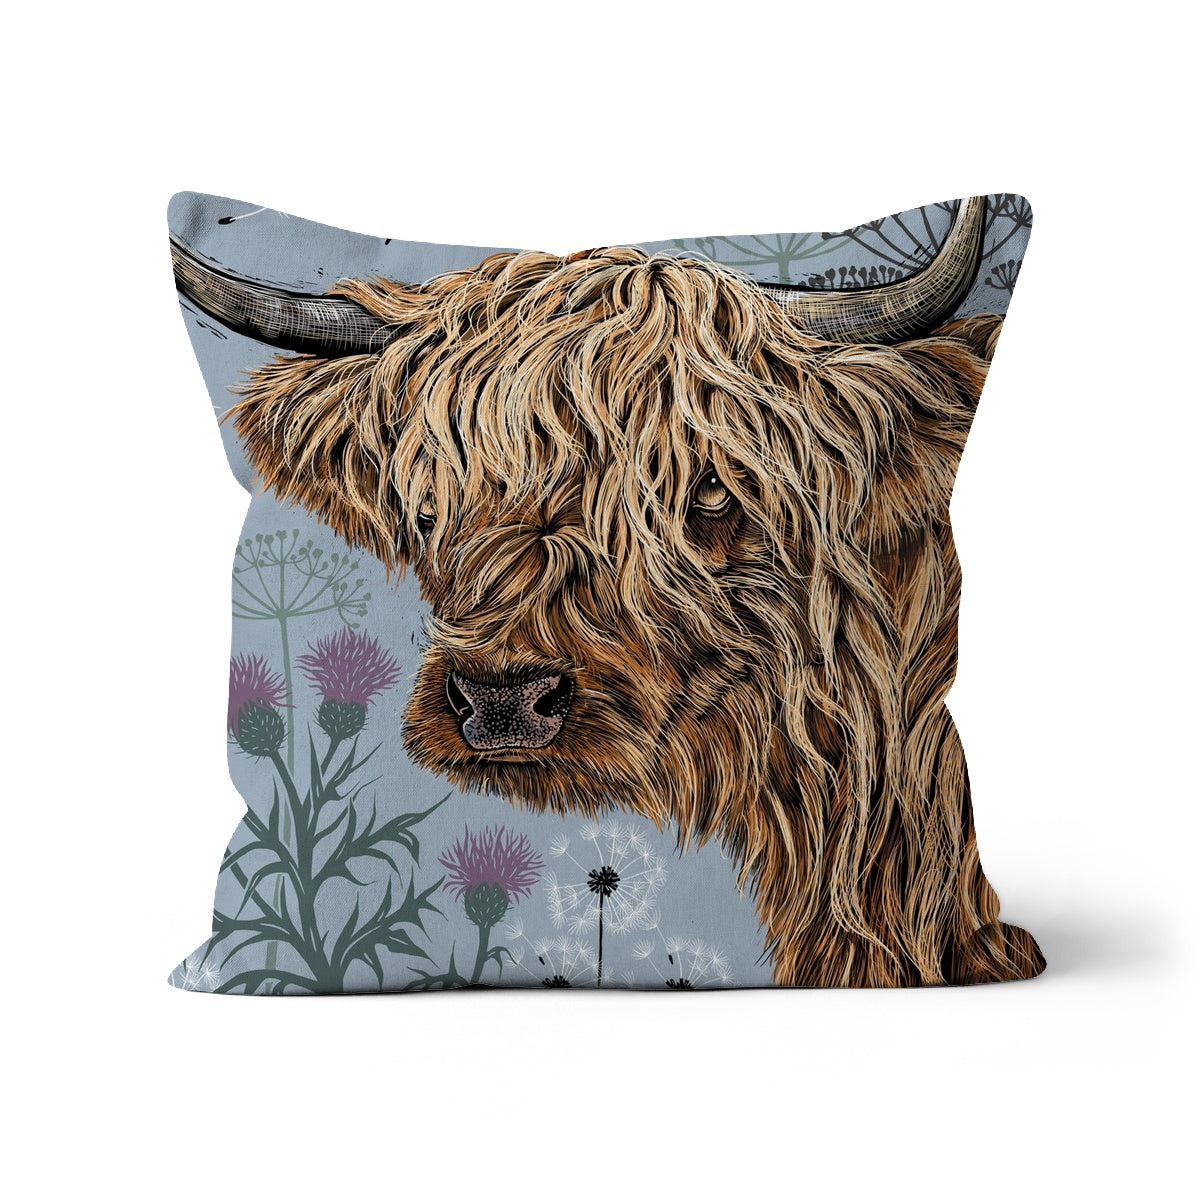 Highland Cow cushion in Blue by Fox and Boo